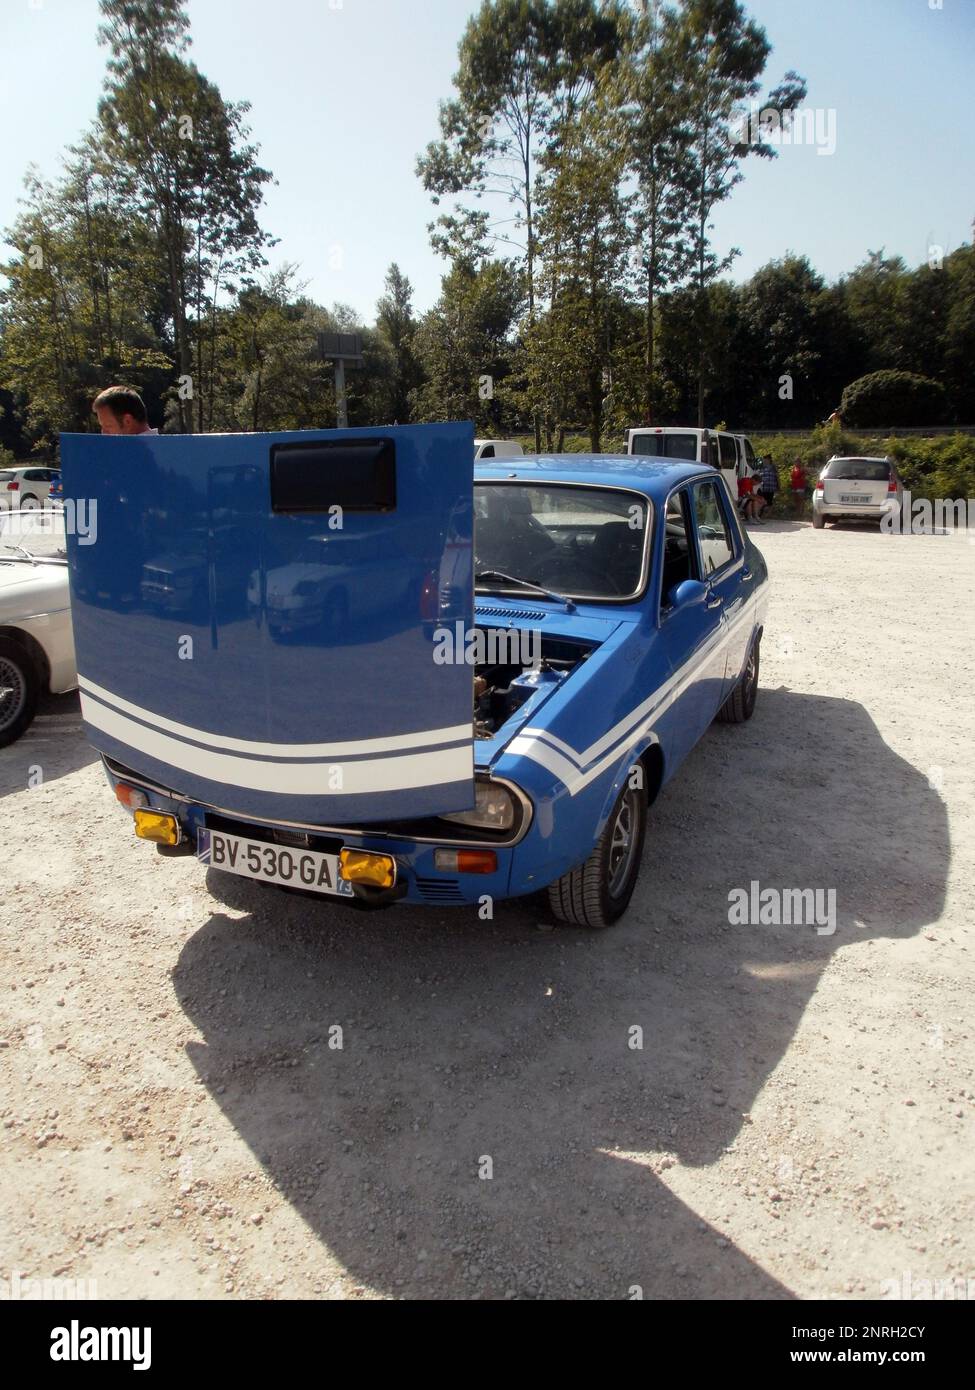 Le Bourget du lac, France - August 19th 2012 : Public exhibition of classic cars. Focus on a blue Renault Gordini with the hood open. Stock Photo